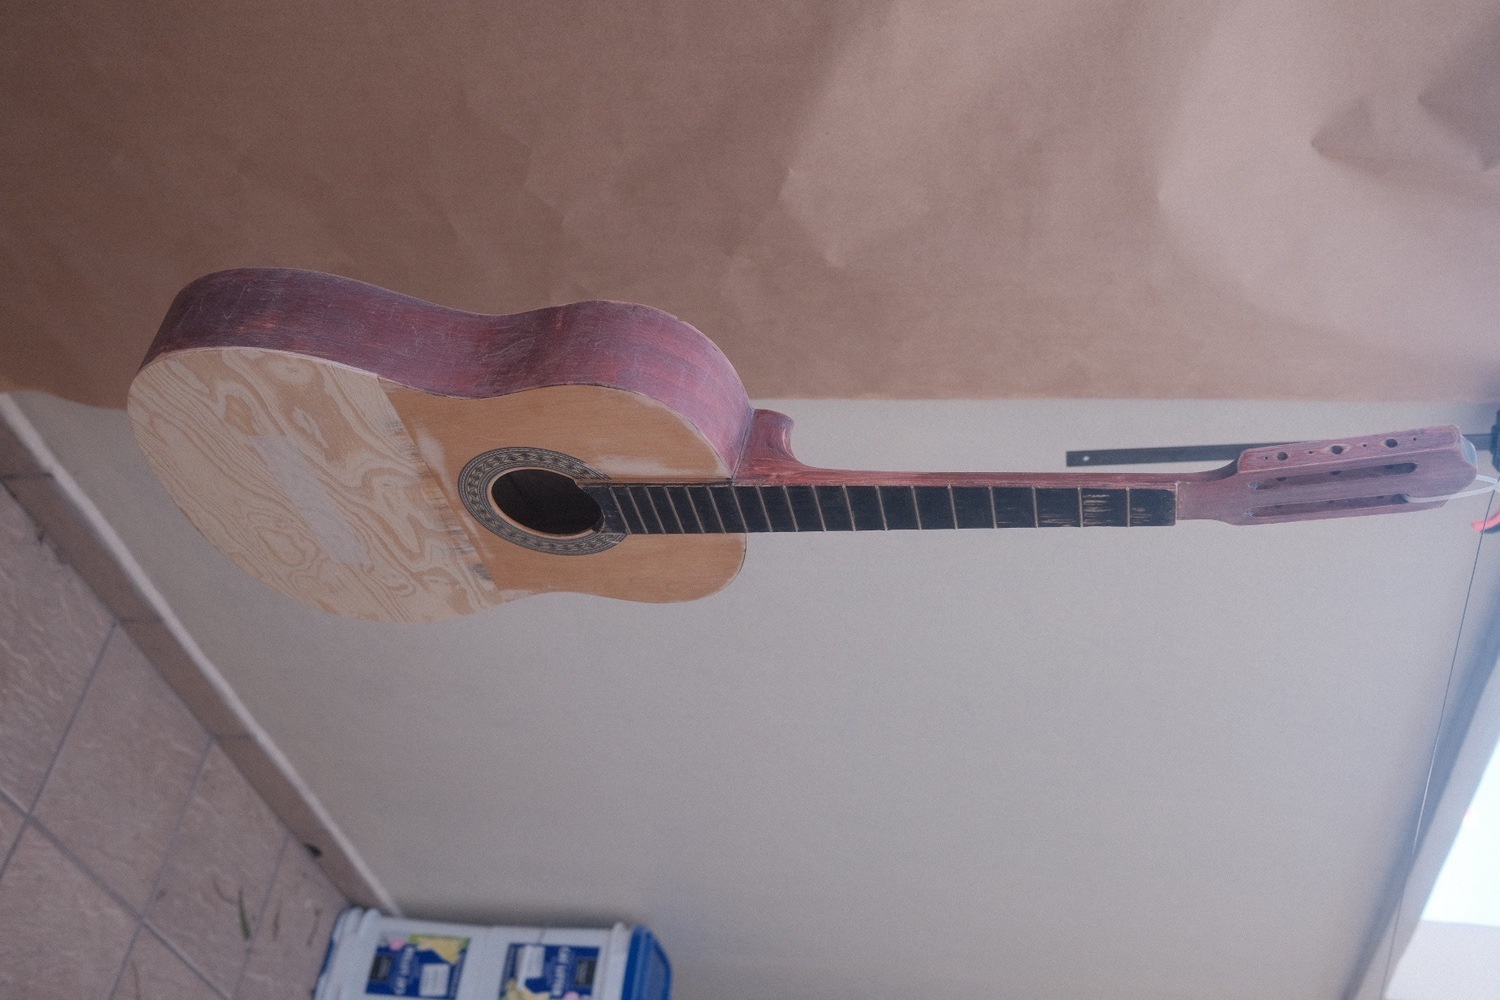 The guitar hanged from a wire to be painted"